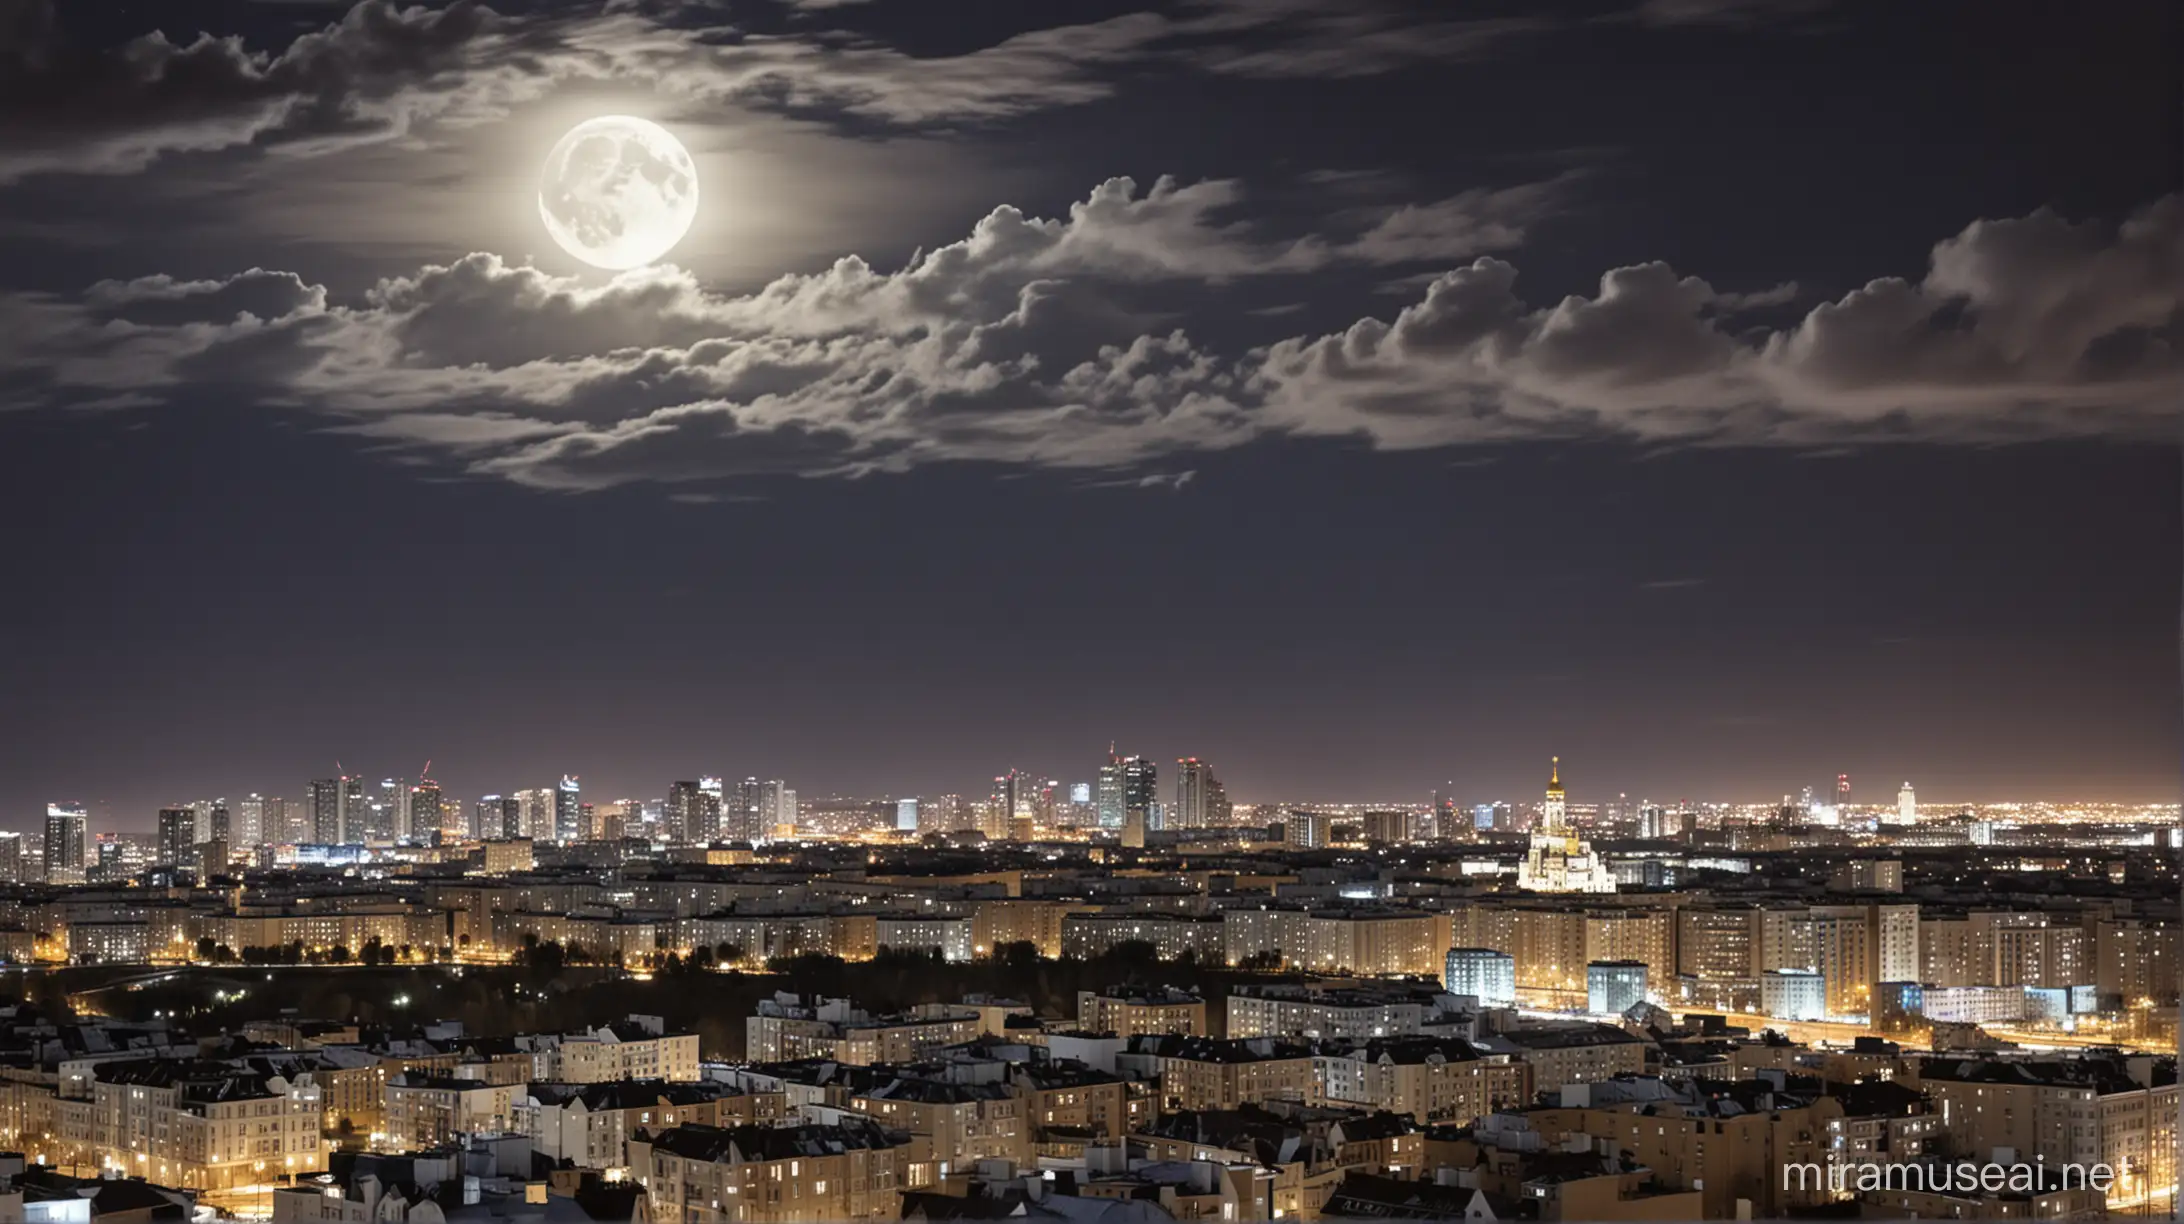 Modern Moscow at Night with Full Moon and Clouds